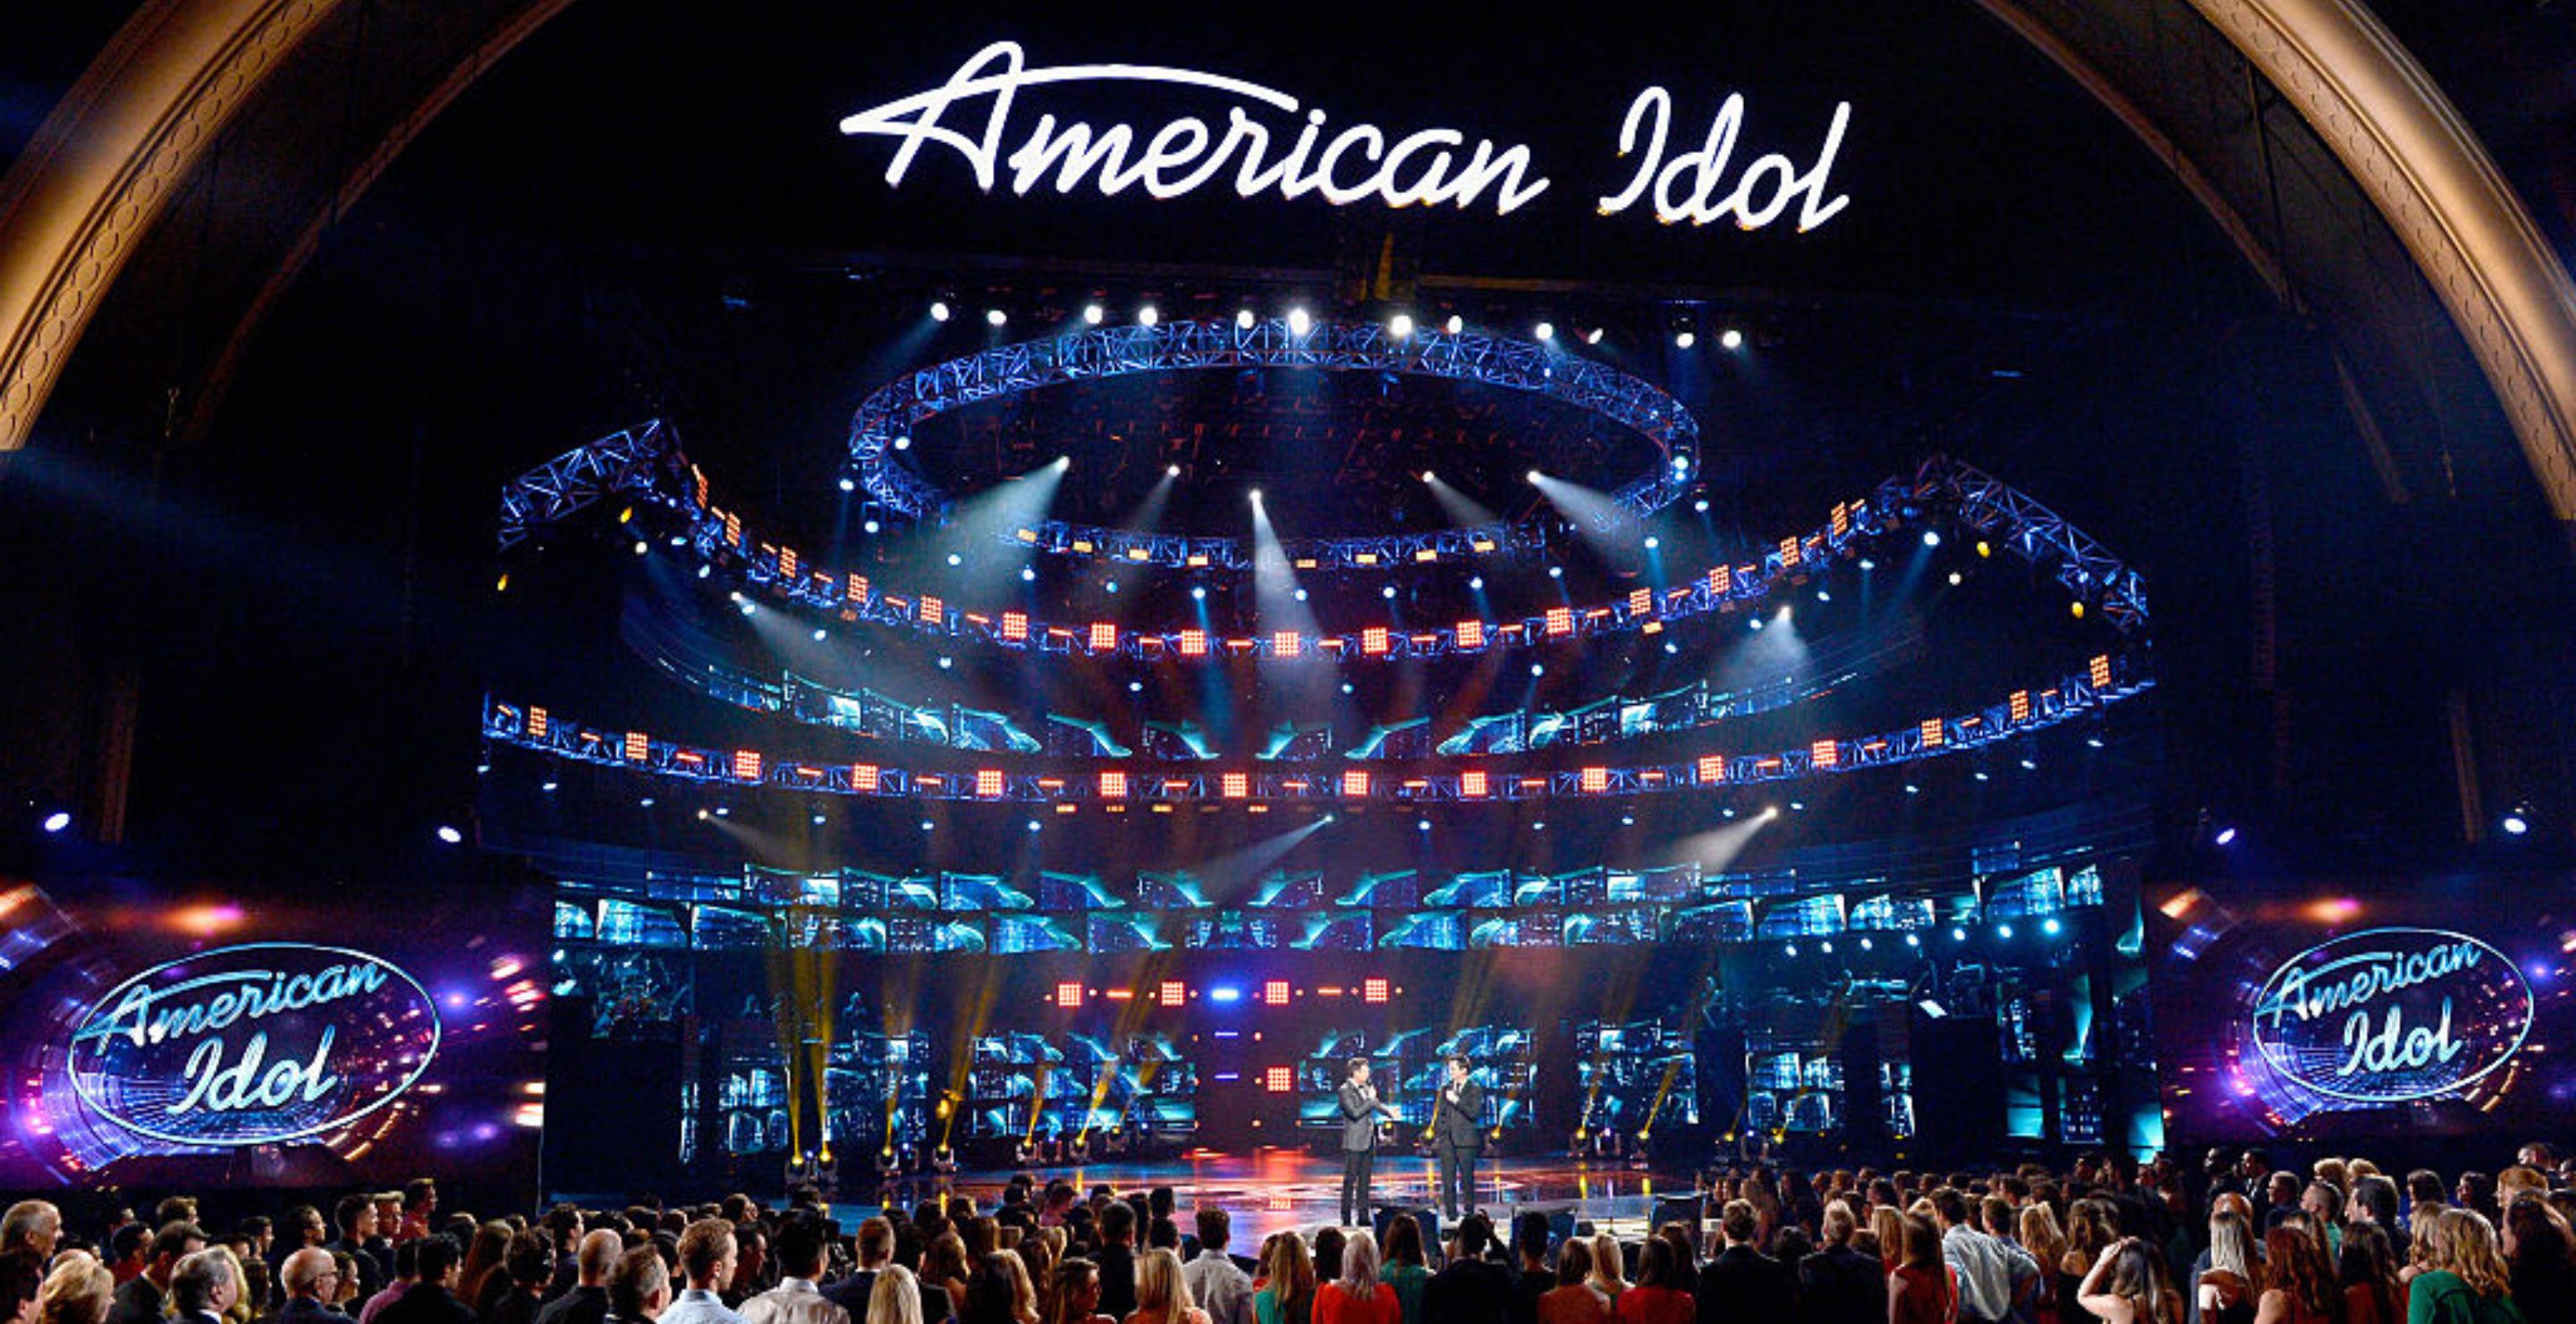 'American Idol' Contestant Is Creating Their Own Music Competition